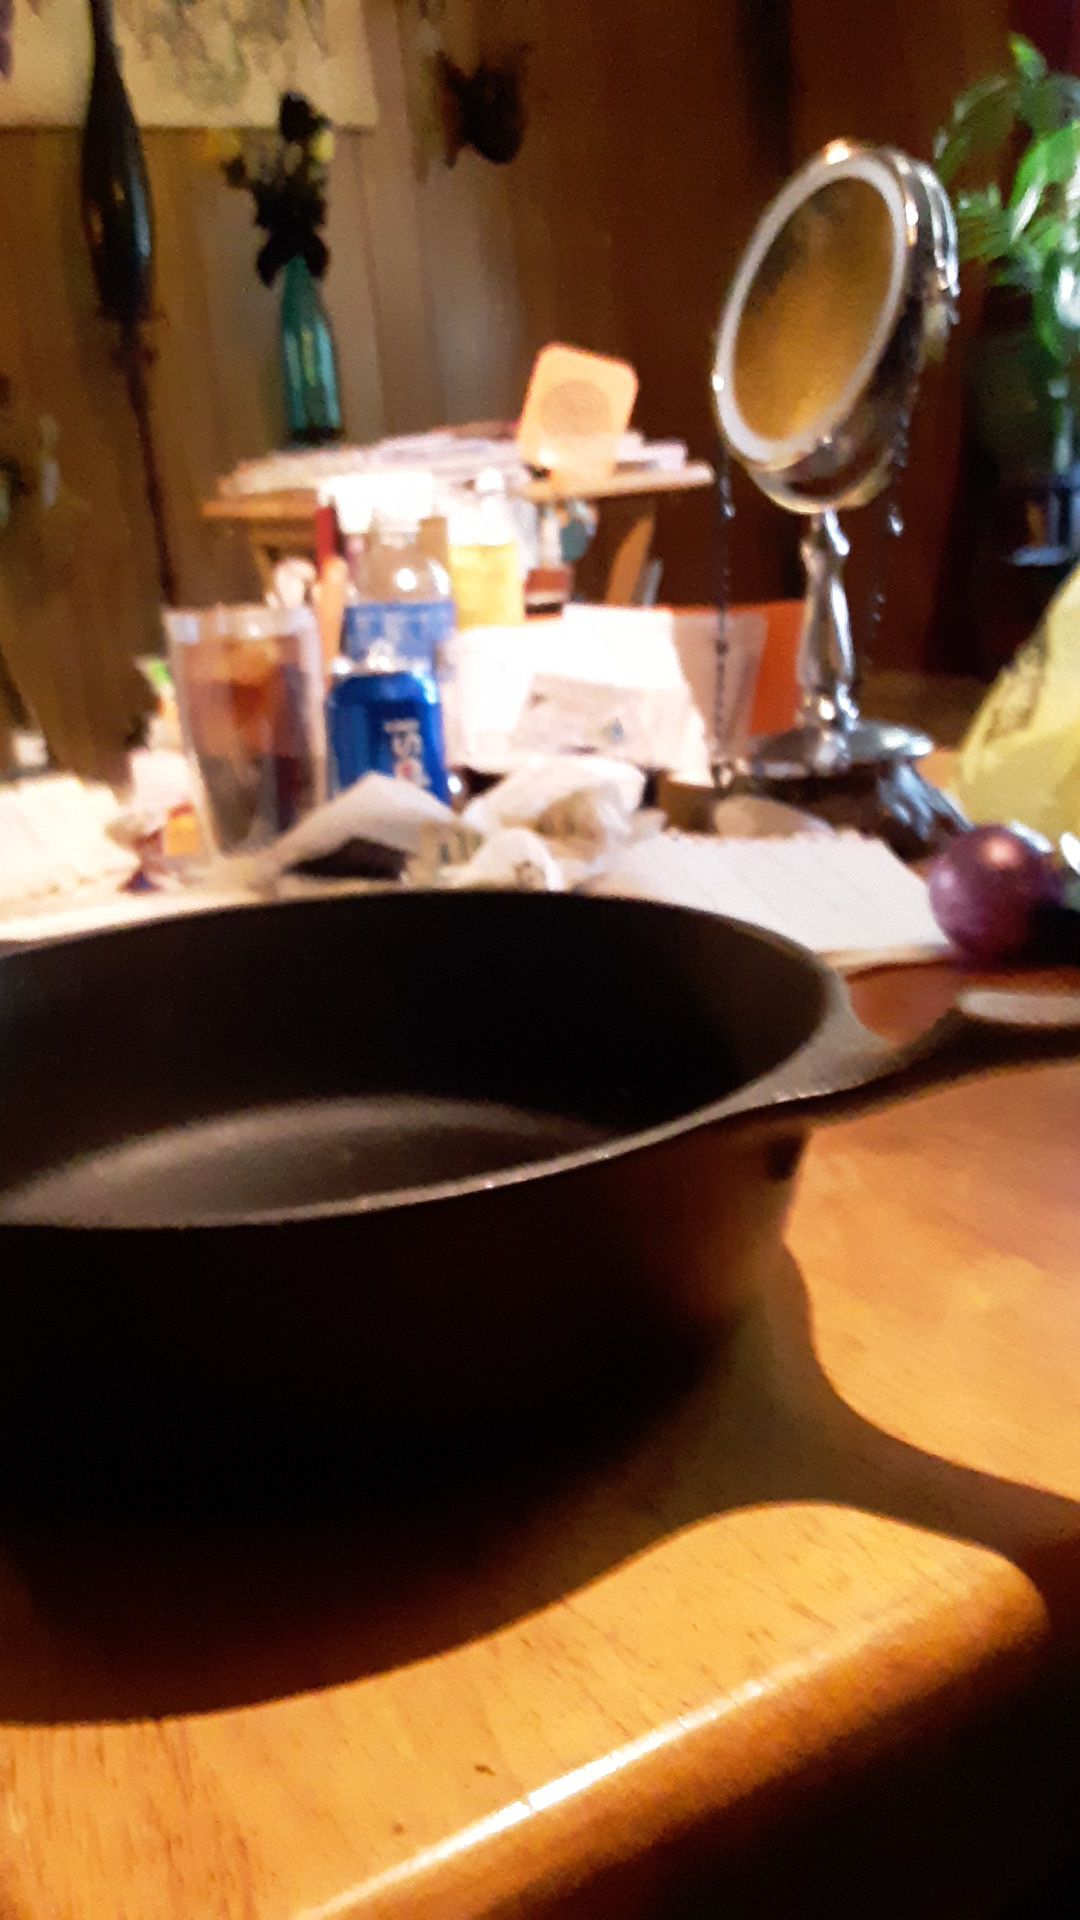 One deep dish cast iron frying pan Wagner's